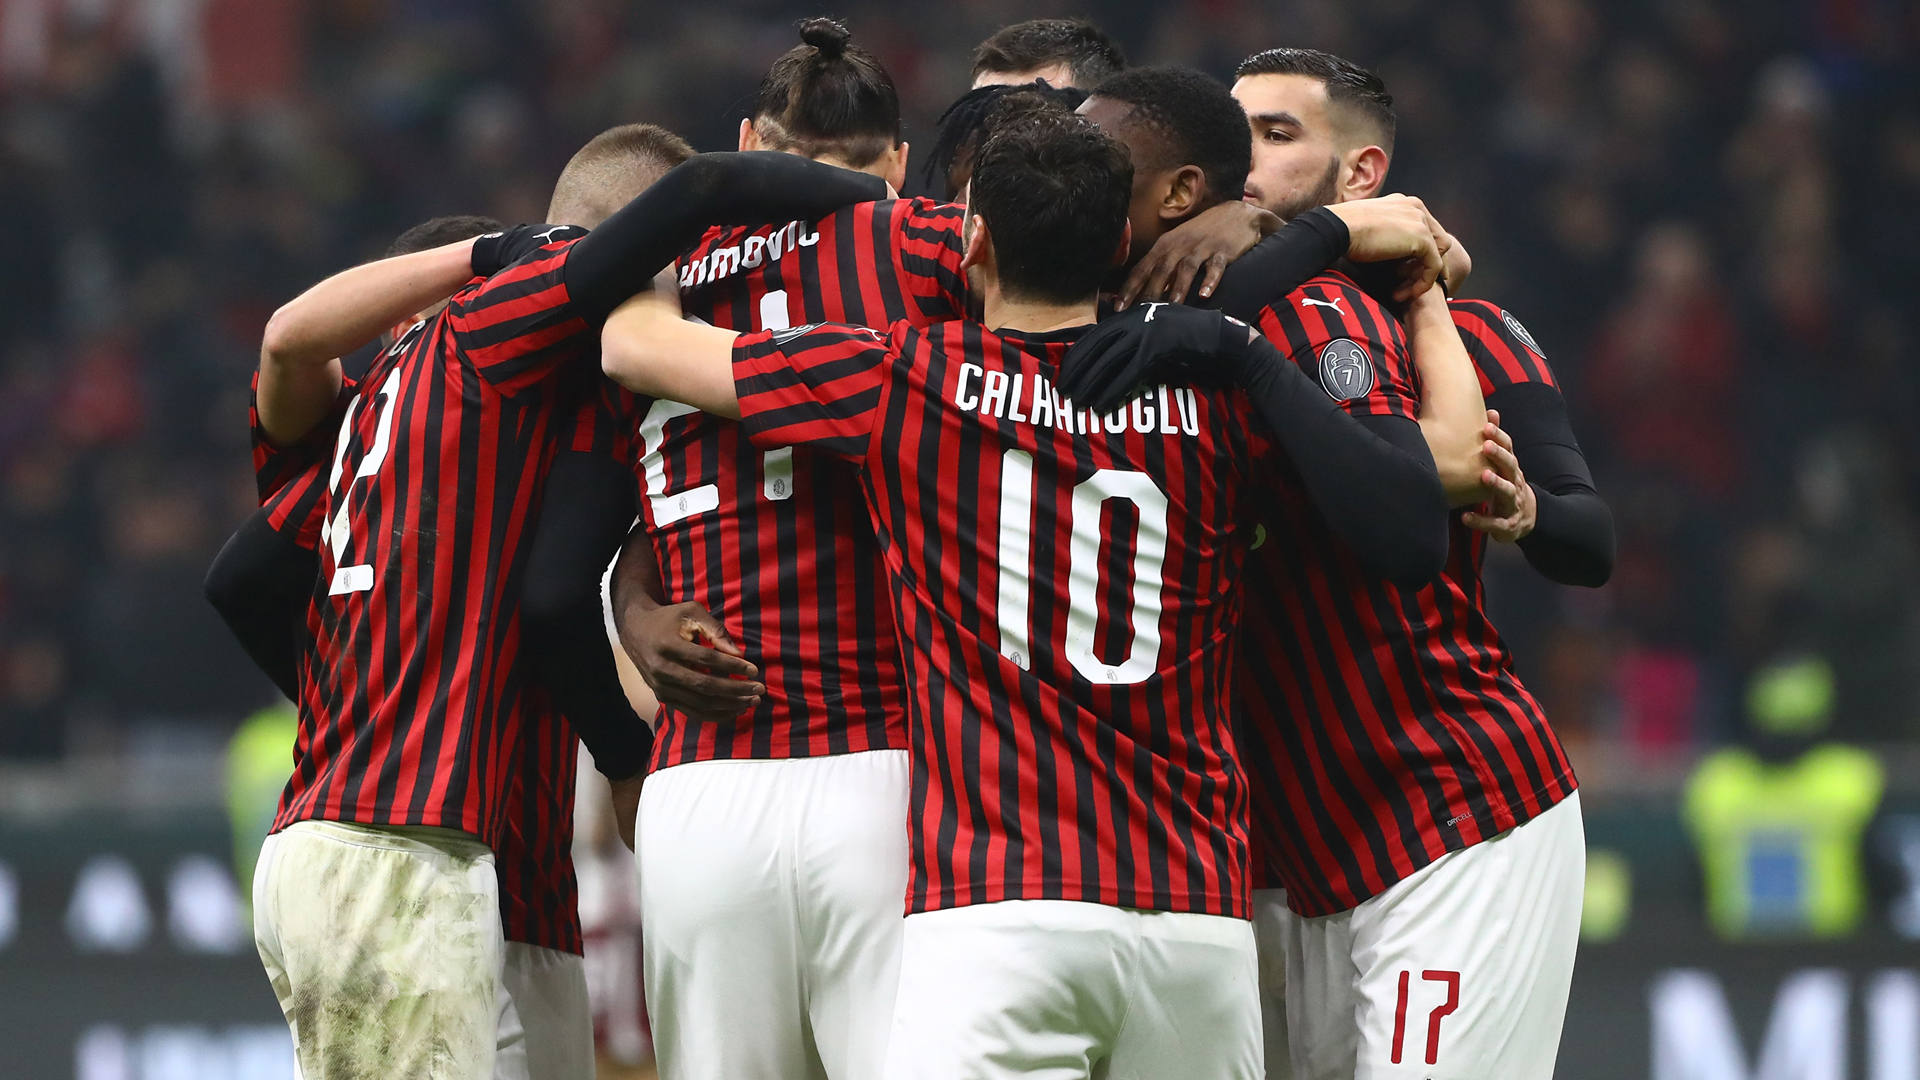 The impact of Milan's substitutes in a win over Torino pleased head coach Stefano Pioli.